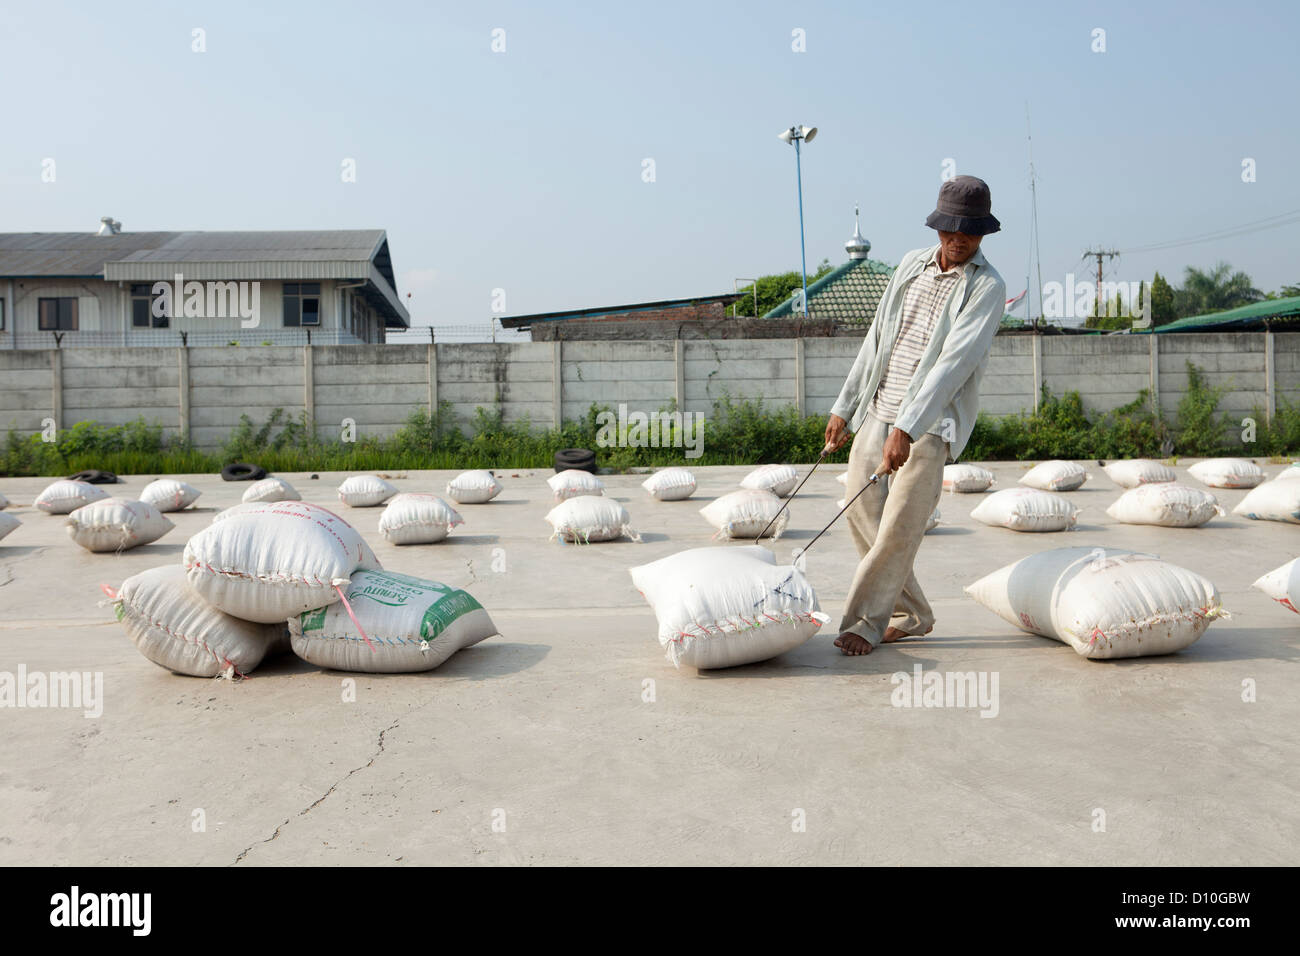 Bagging up rice for export. Indonesia Stock Photo